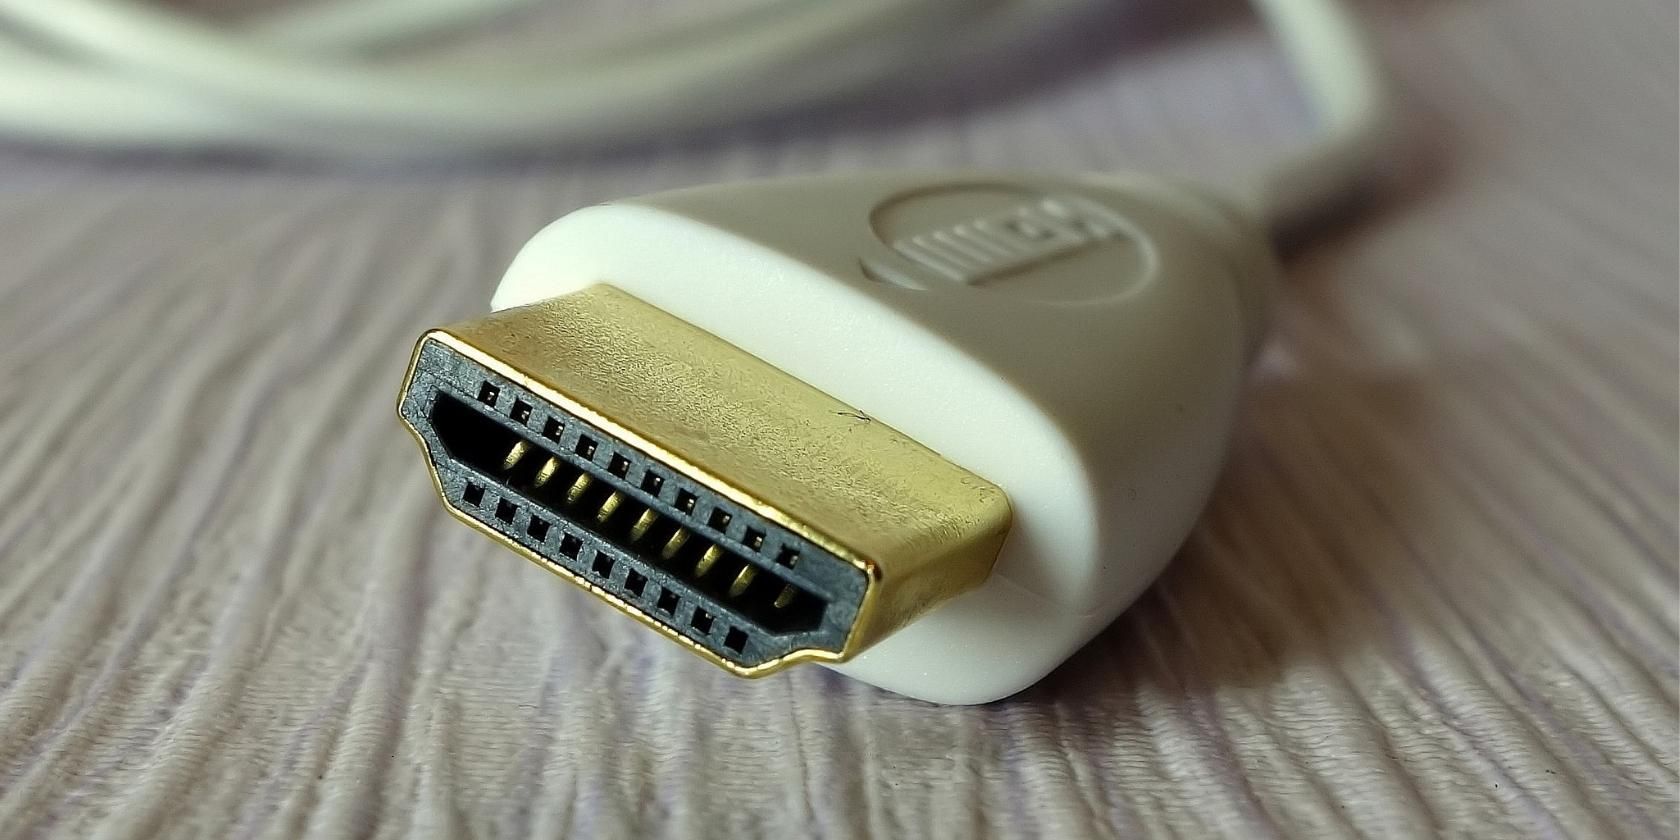 HDMI Cable Types: Everything You Need to Know